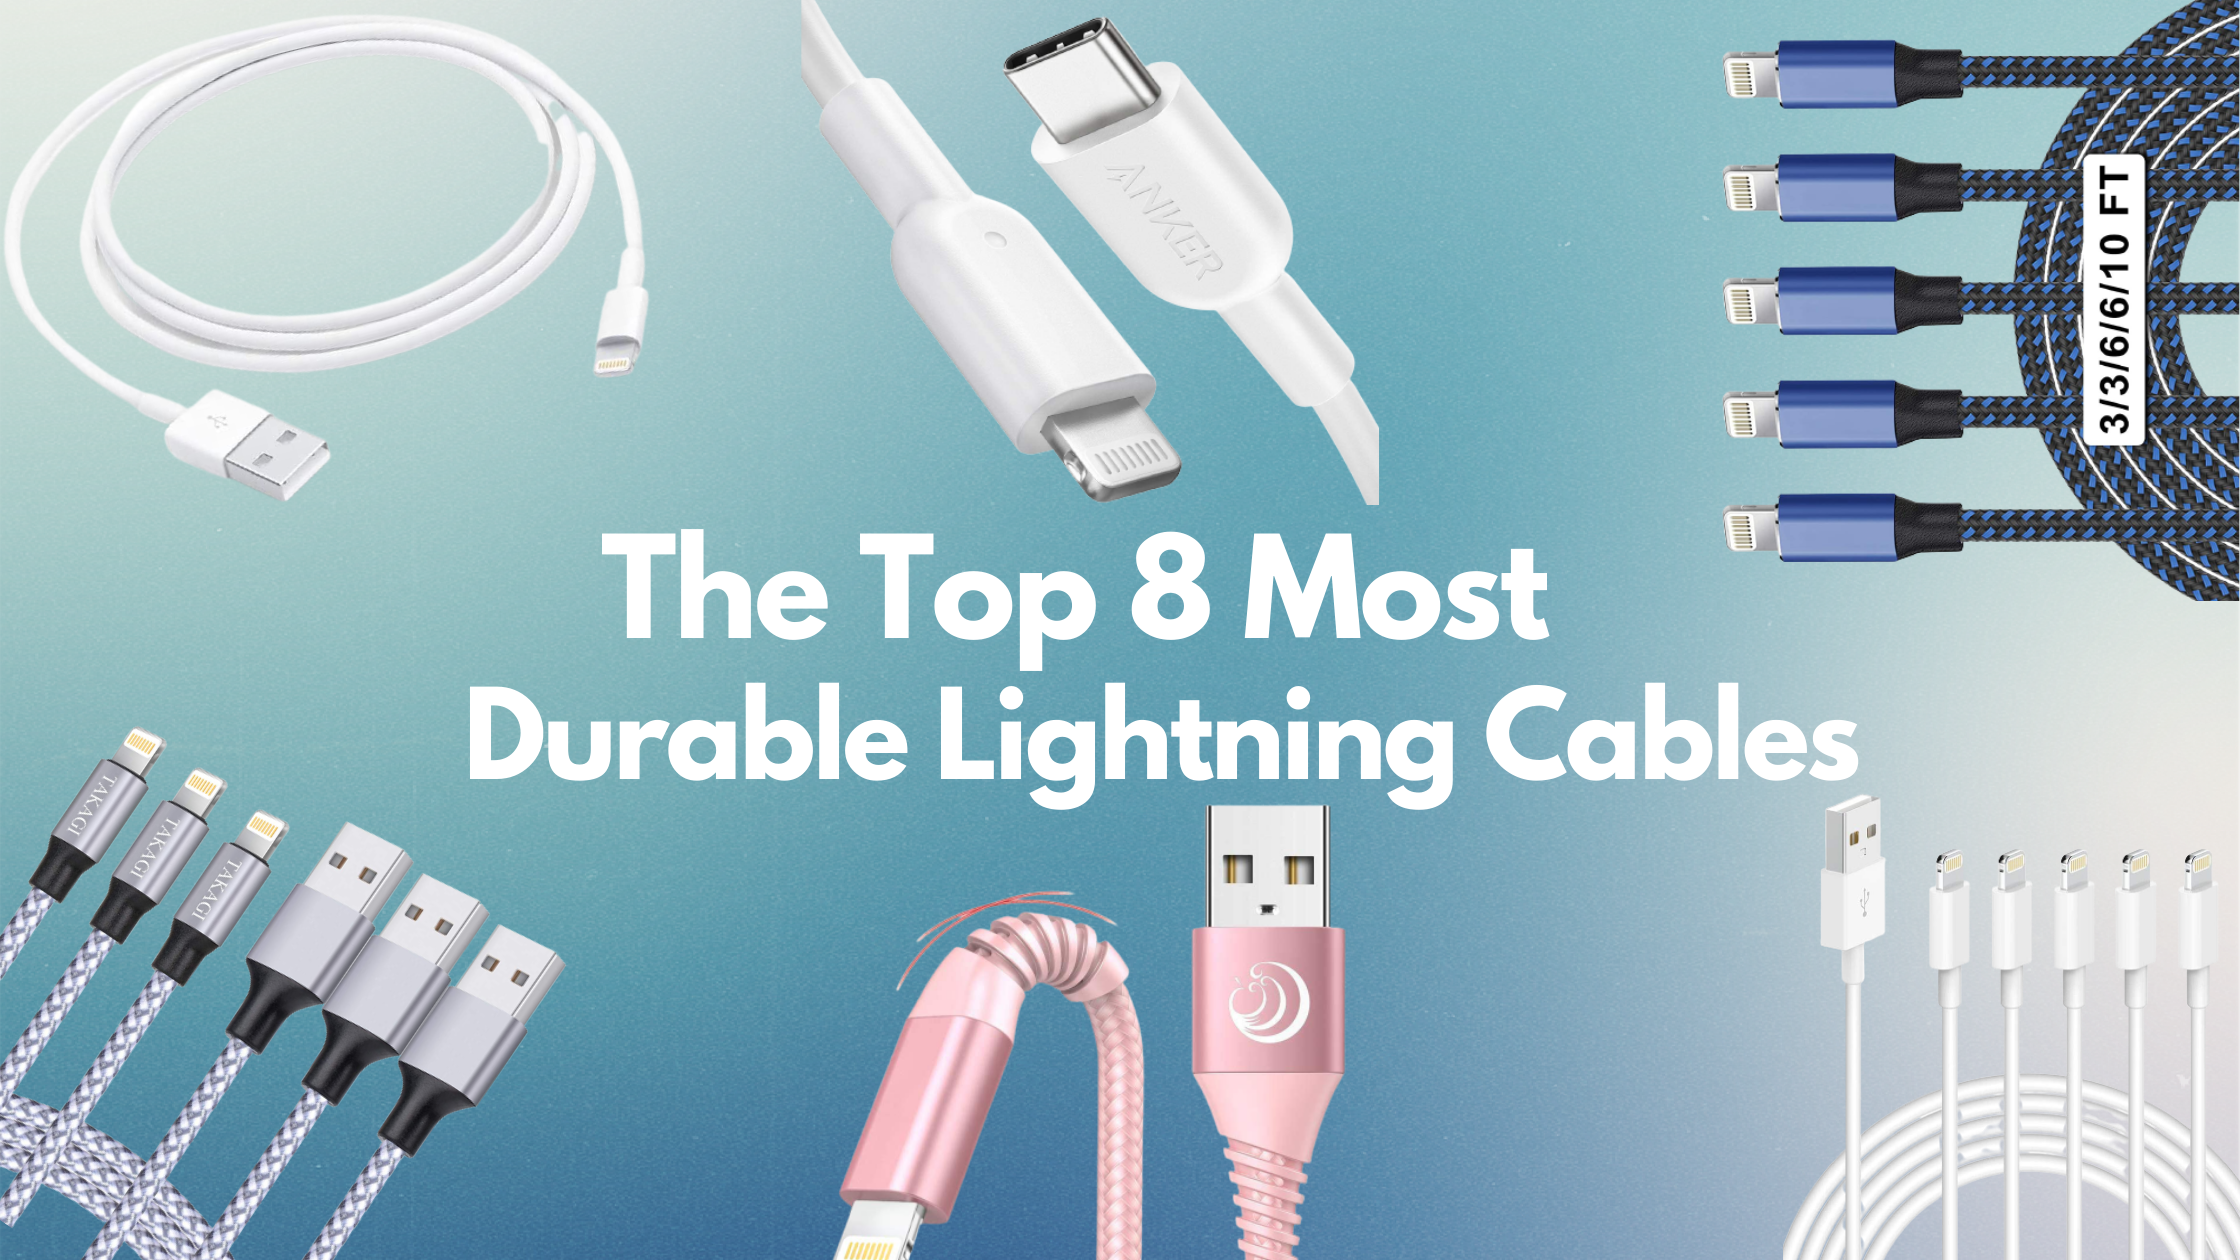 Top 8 Most Durable Lightning Cables